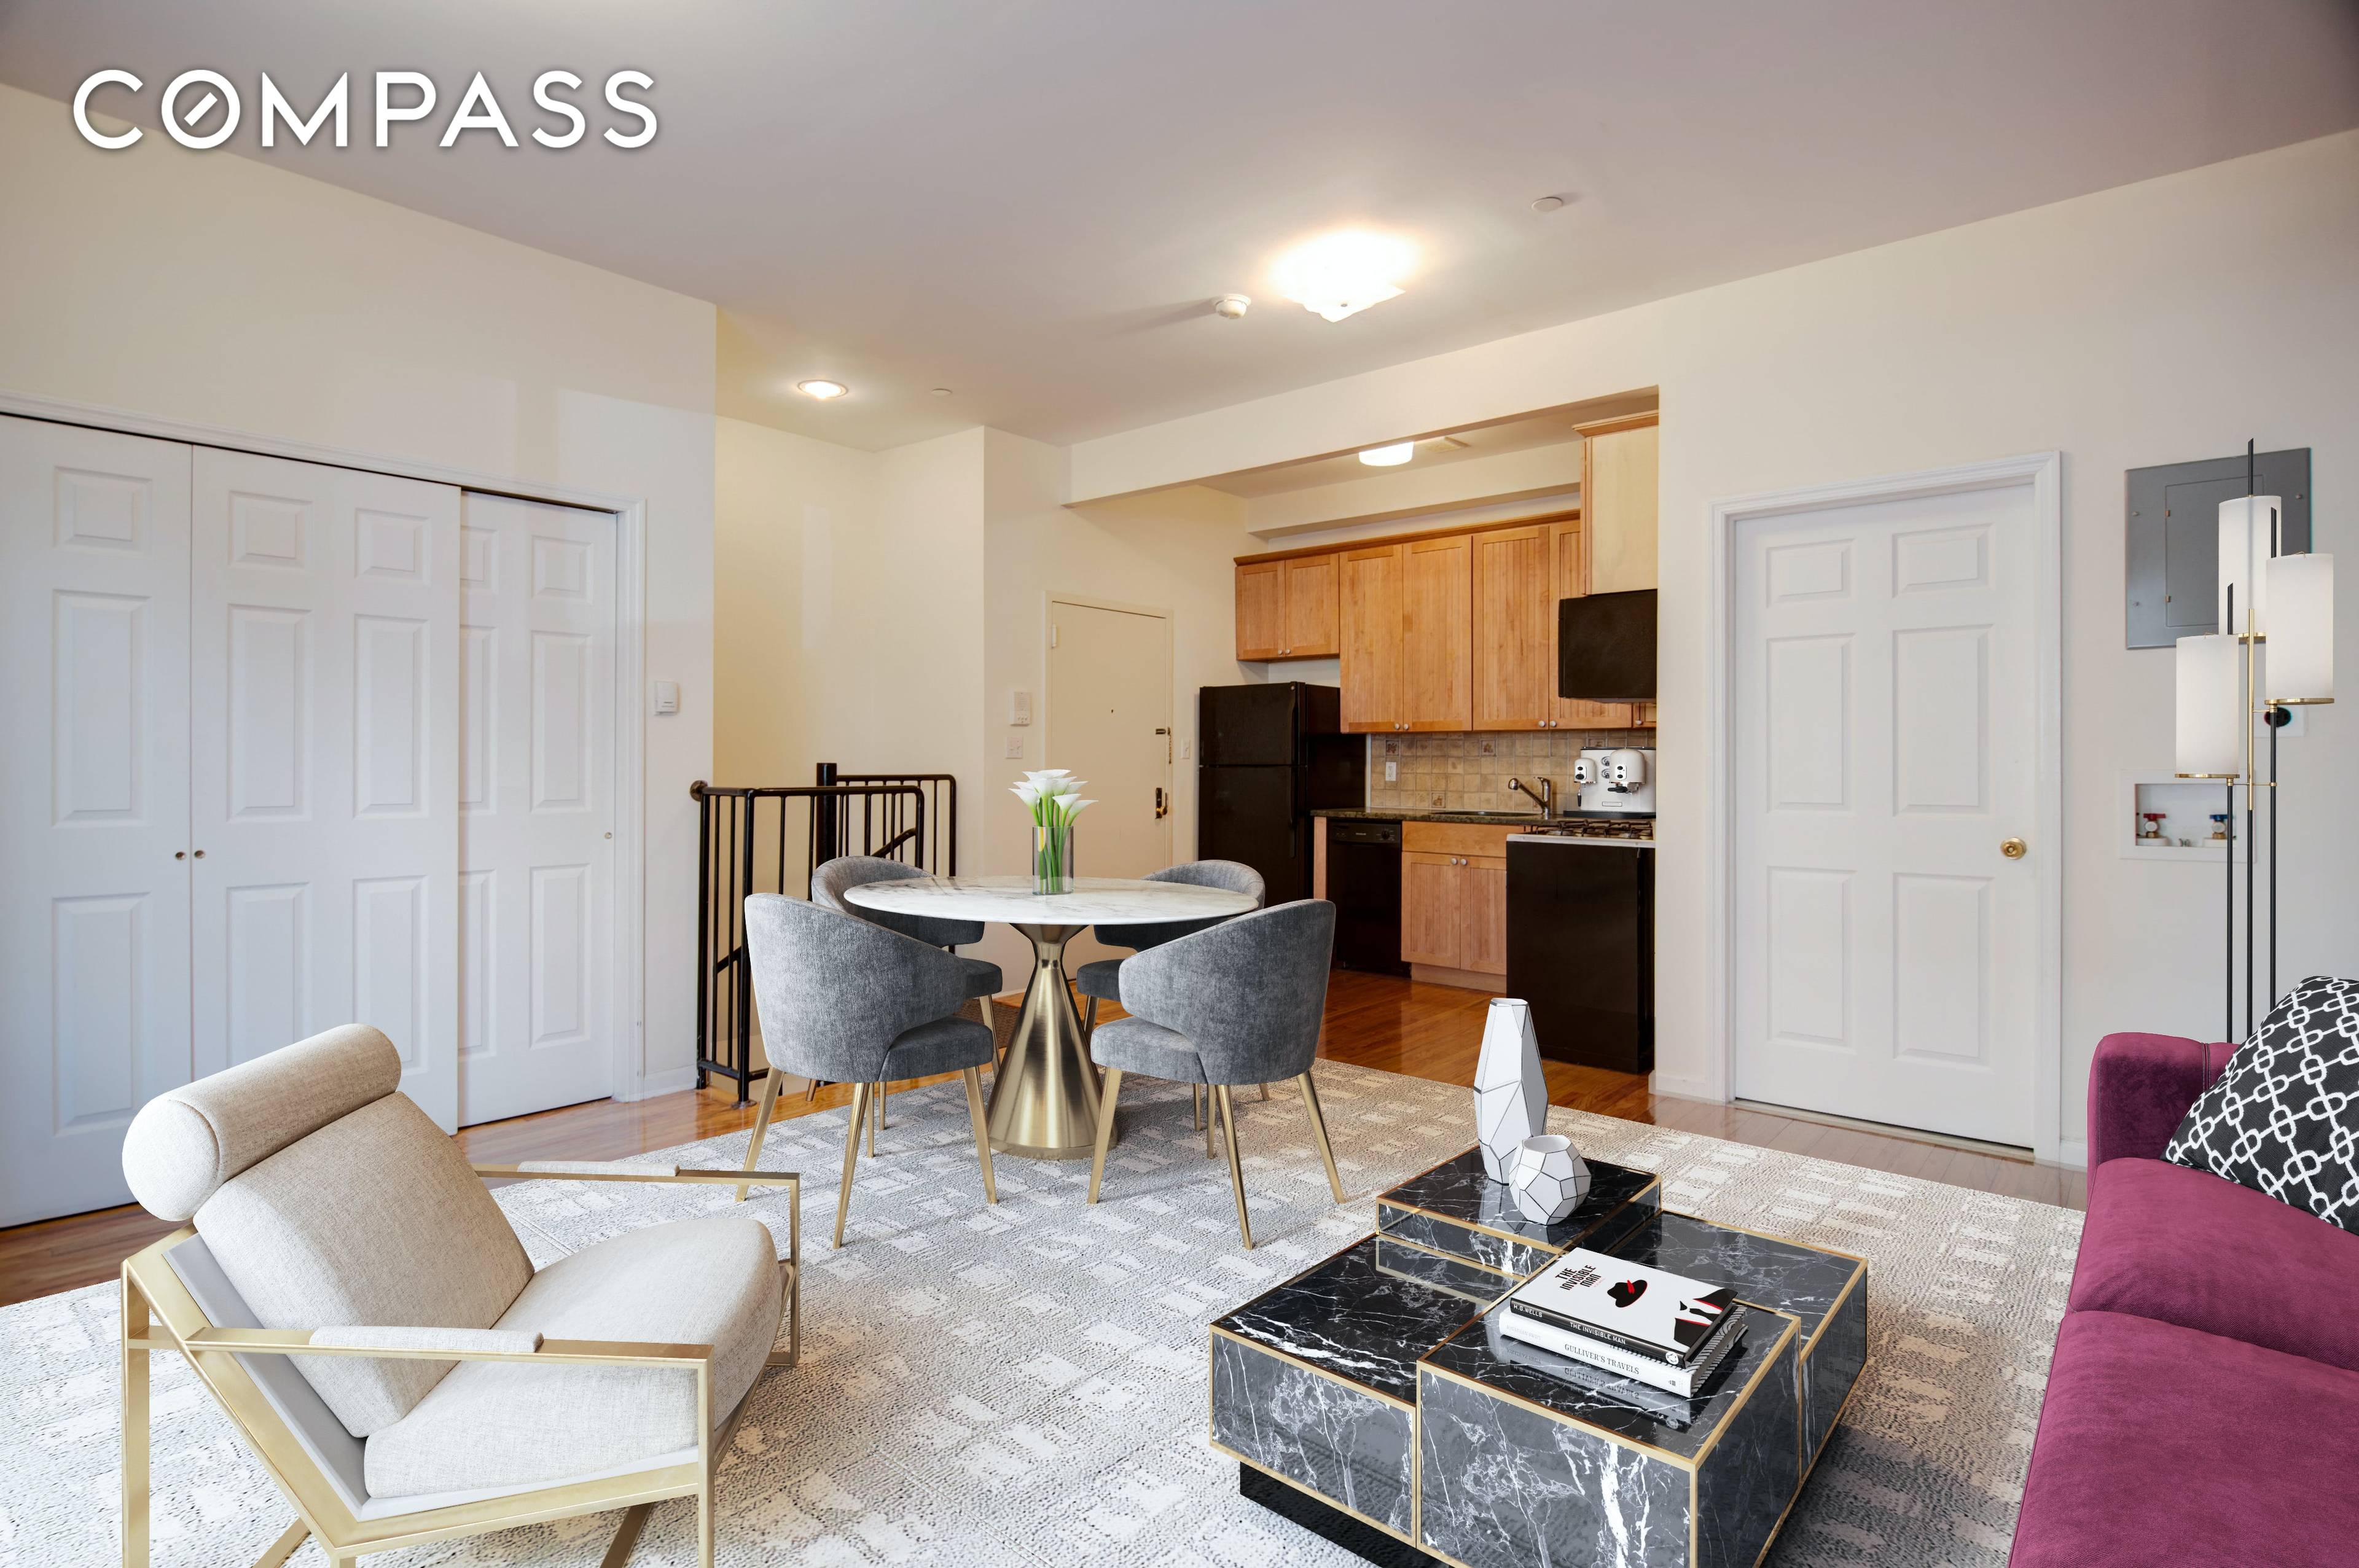 Williamsburg Massive Convertible 1BD 2BA Duplex with Exposed Brick, Stainless Steel Appliances, M W, D W, and Washer Dryer Easily made into a two bedroom space, this incredible duplex boasts ...